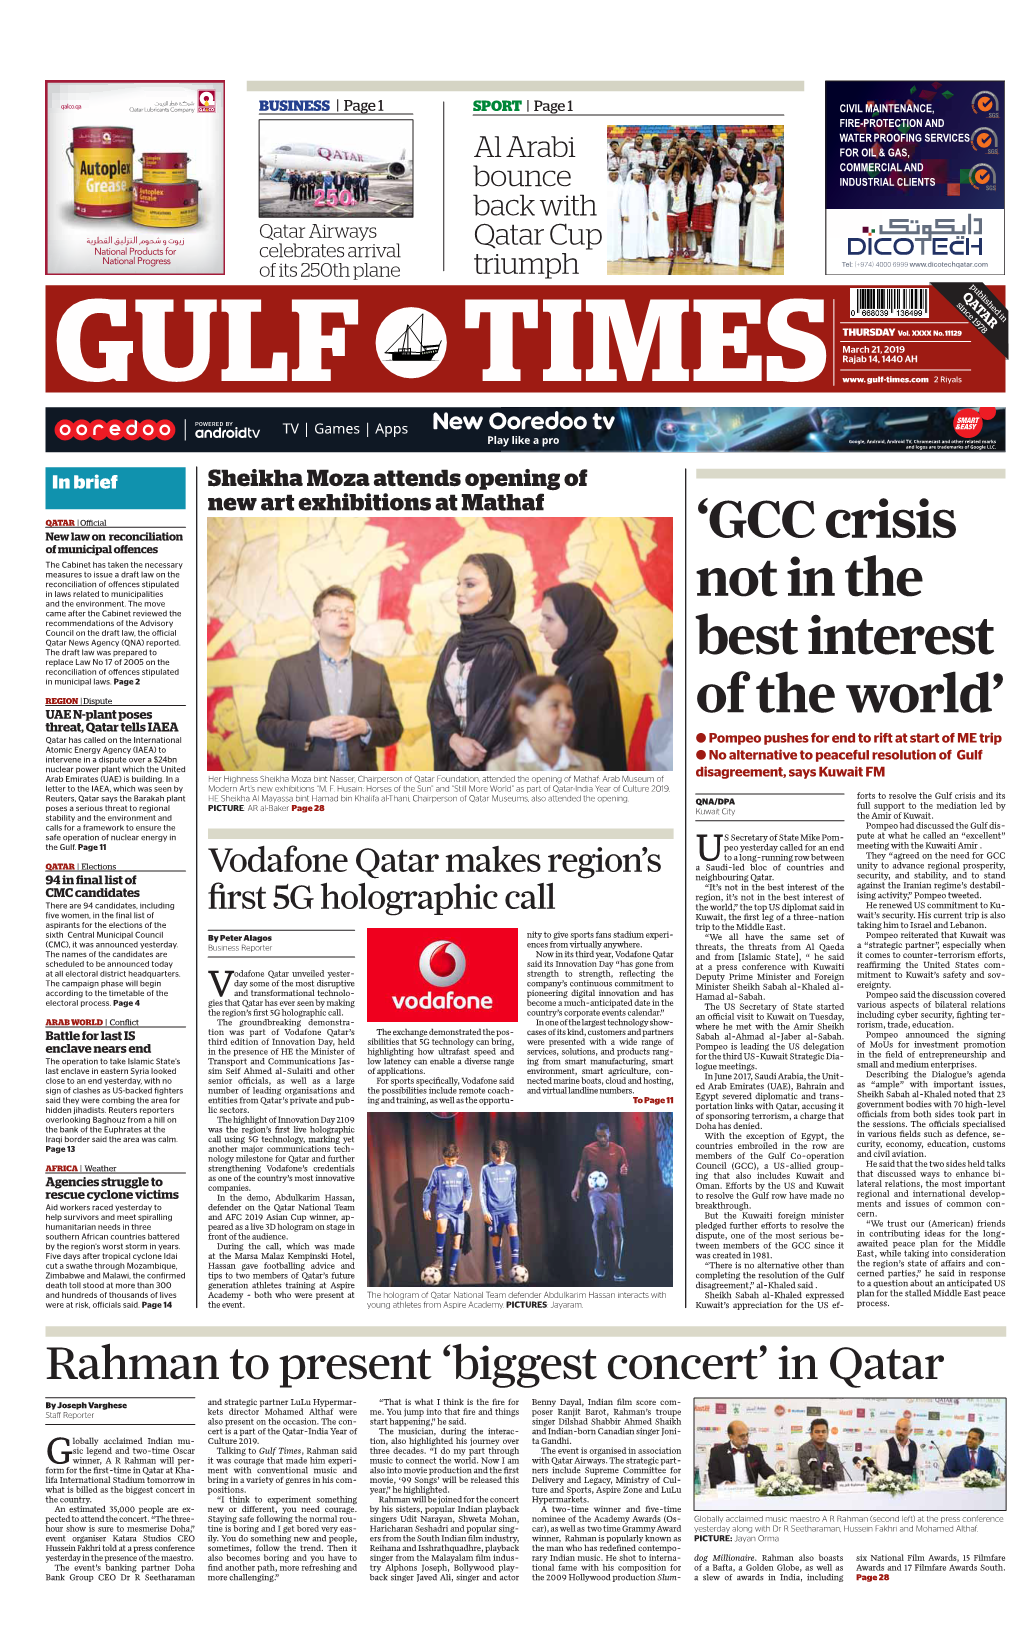 'GCC Crisis Not in the Best Interest of the World'